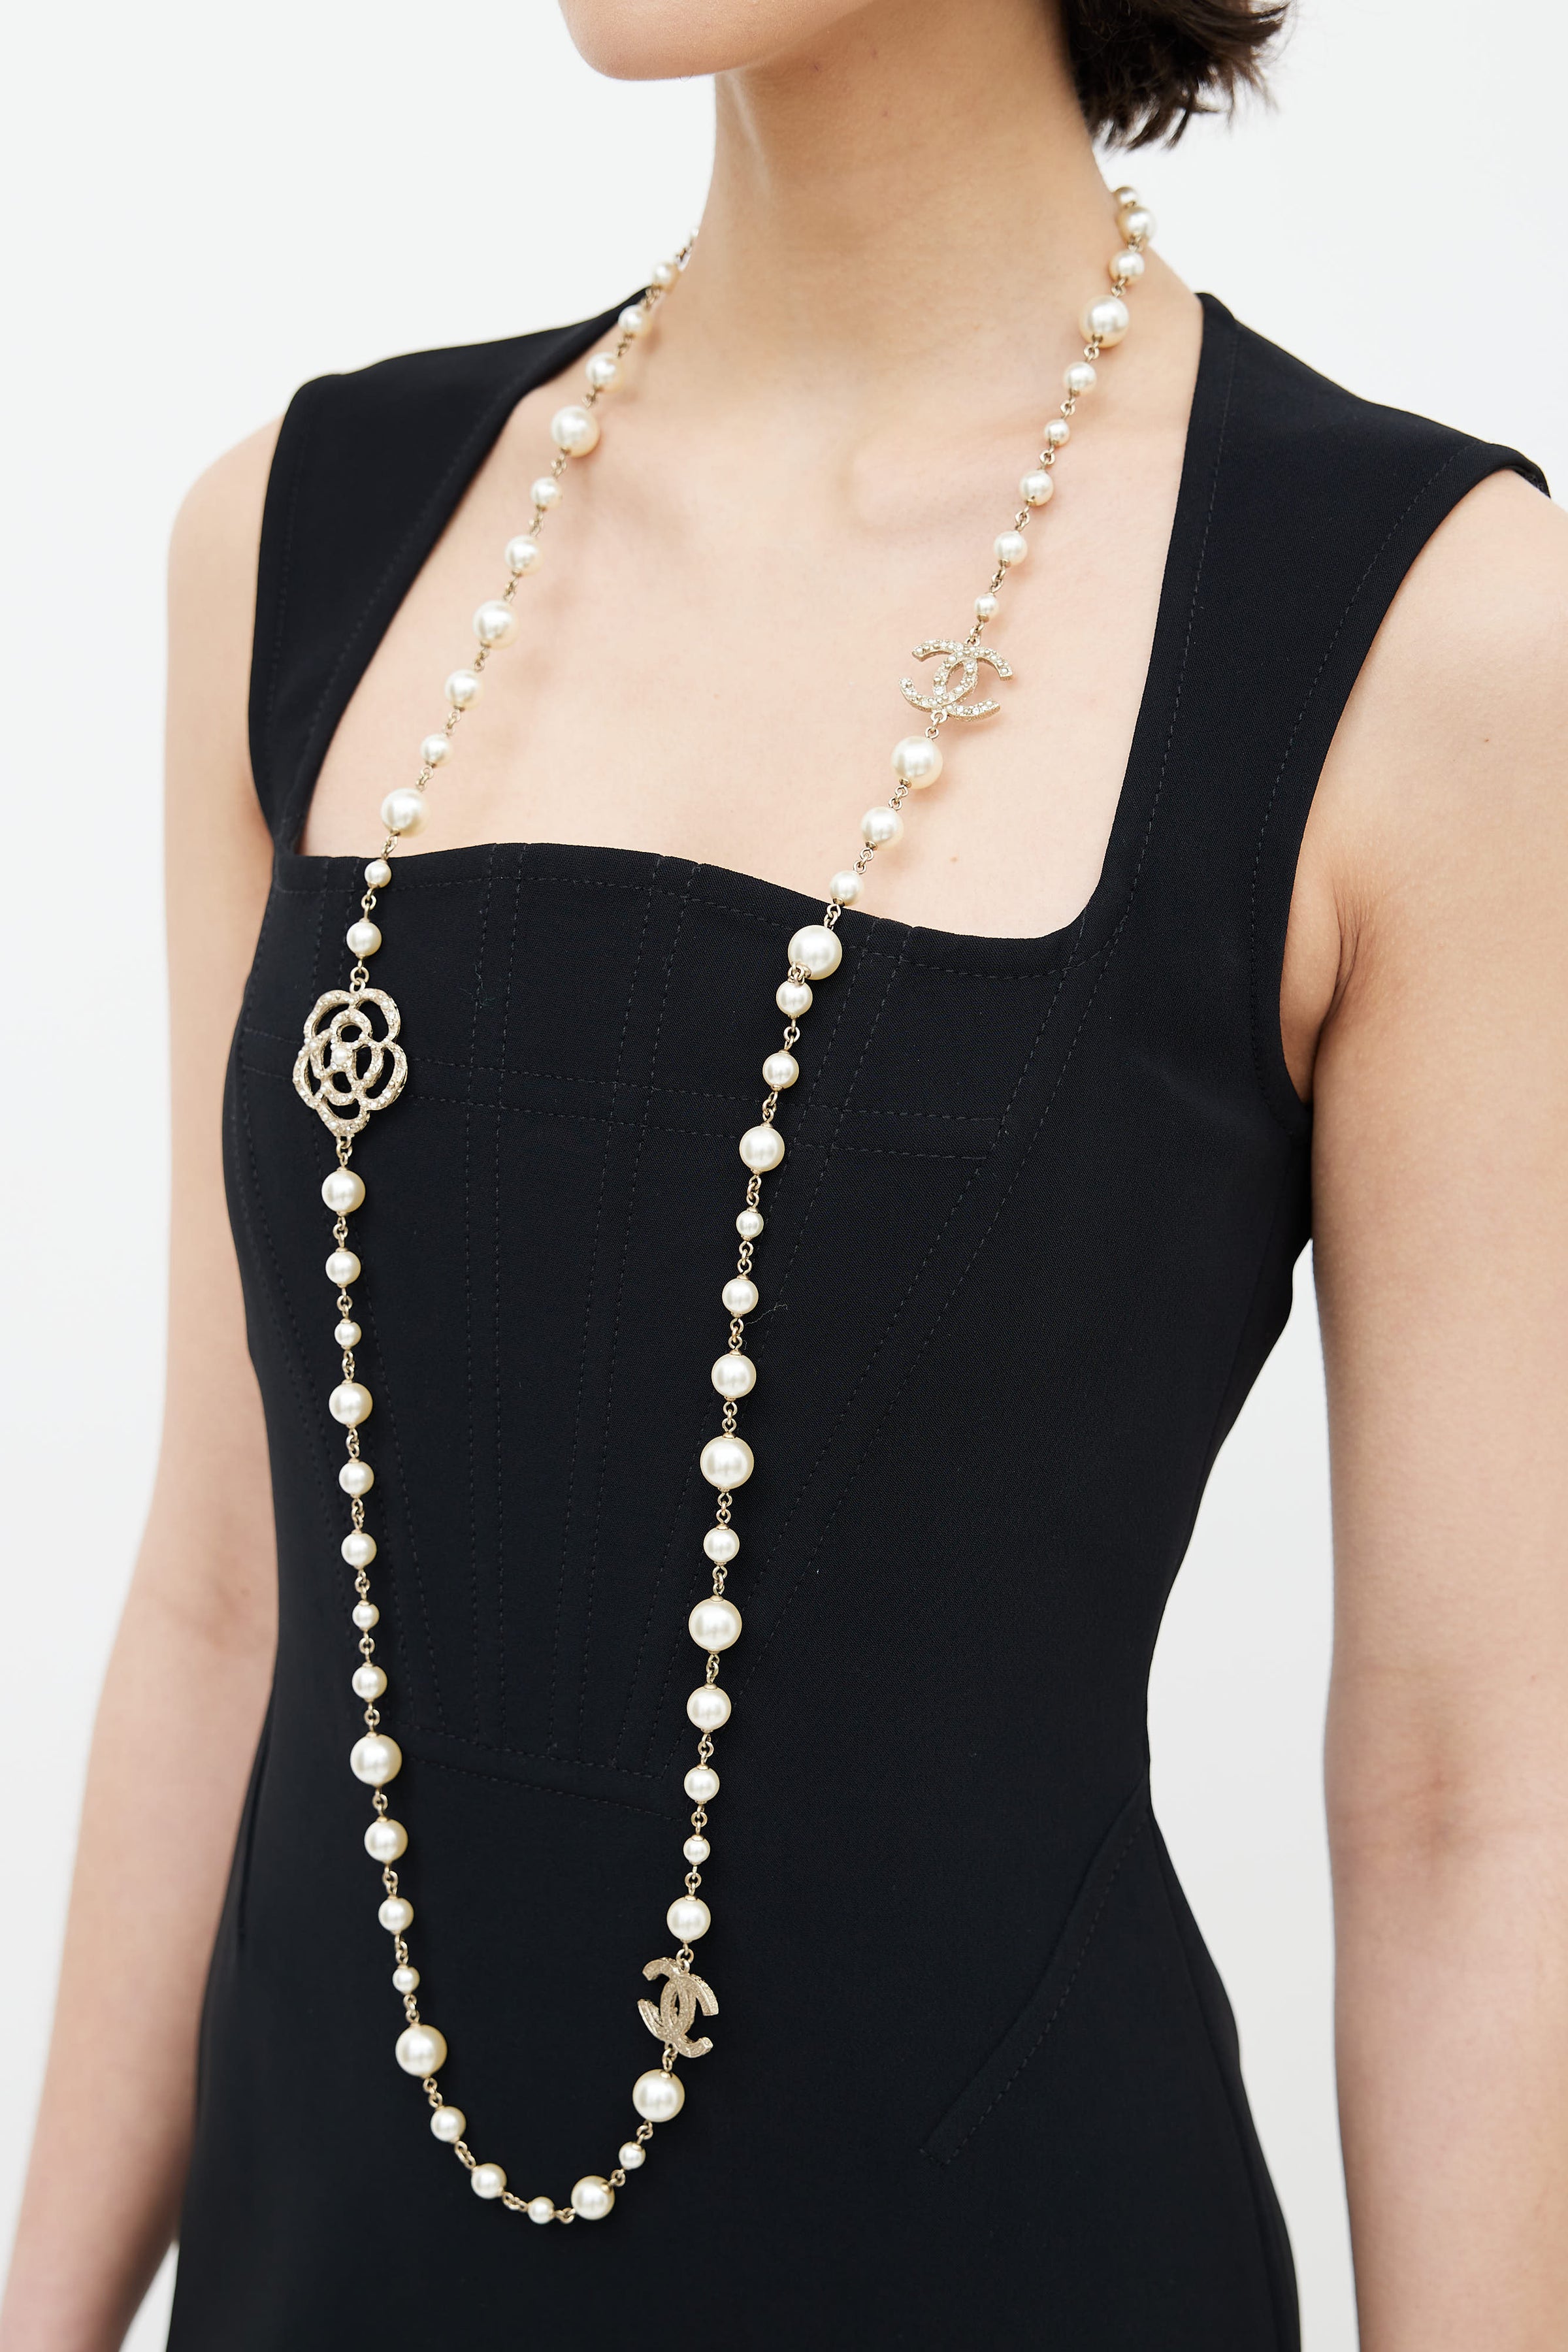 Vintage 90s CHANEL Chain Link Faux Pearl Long Necklace 